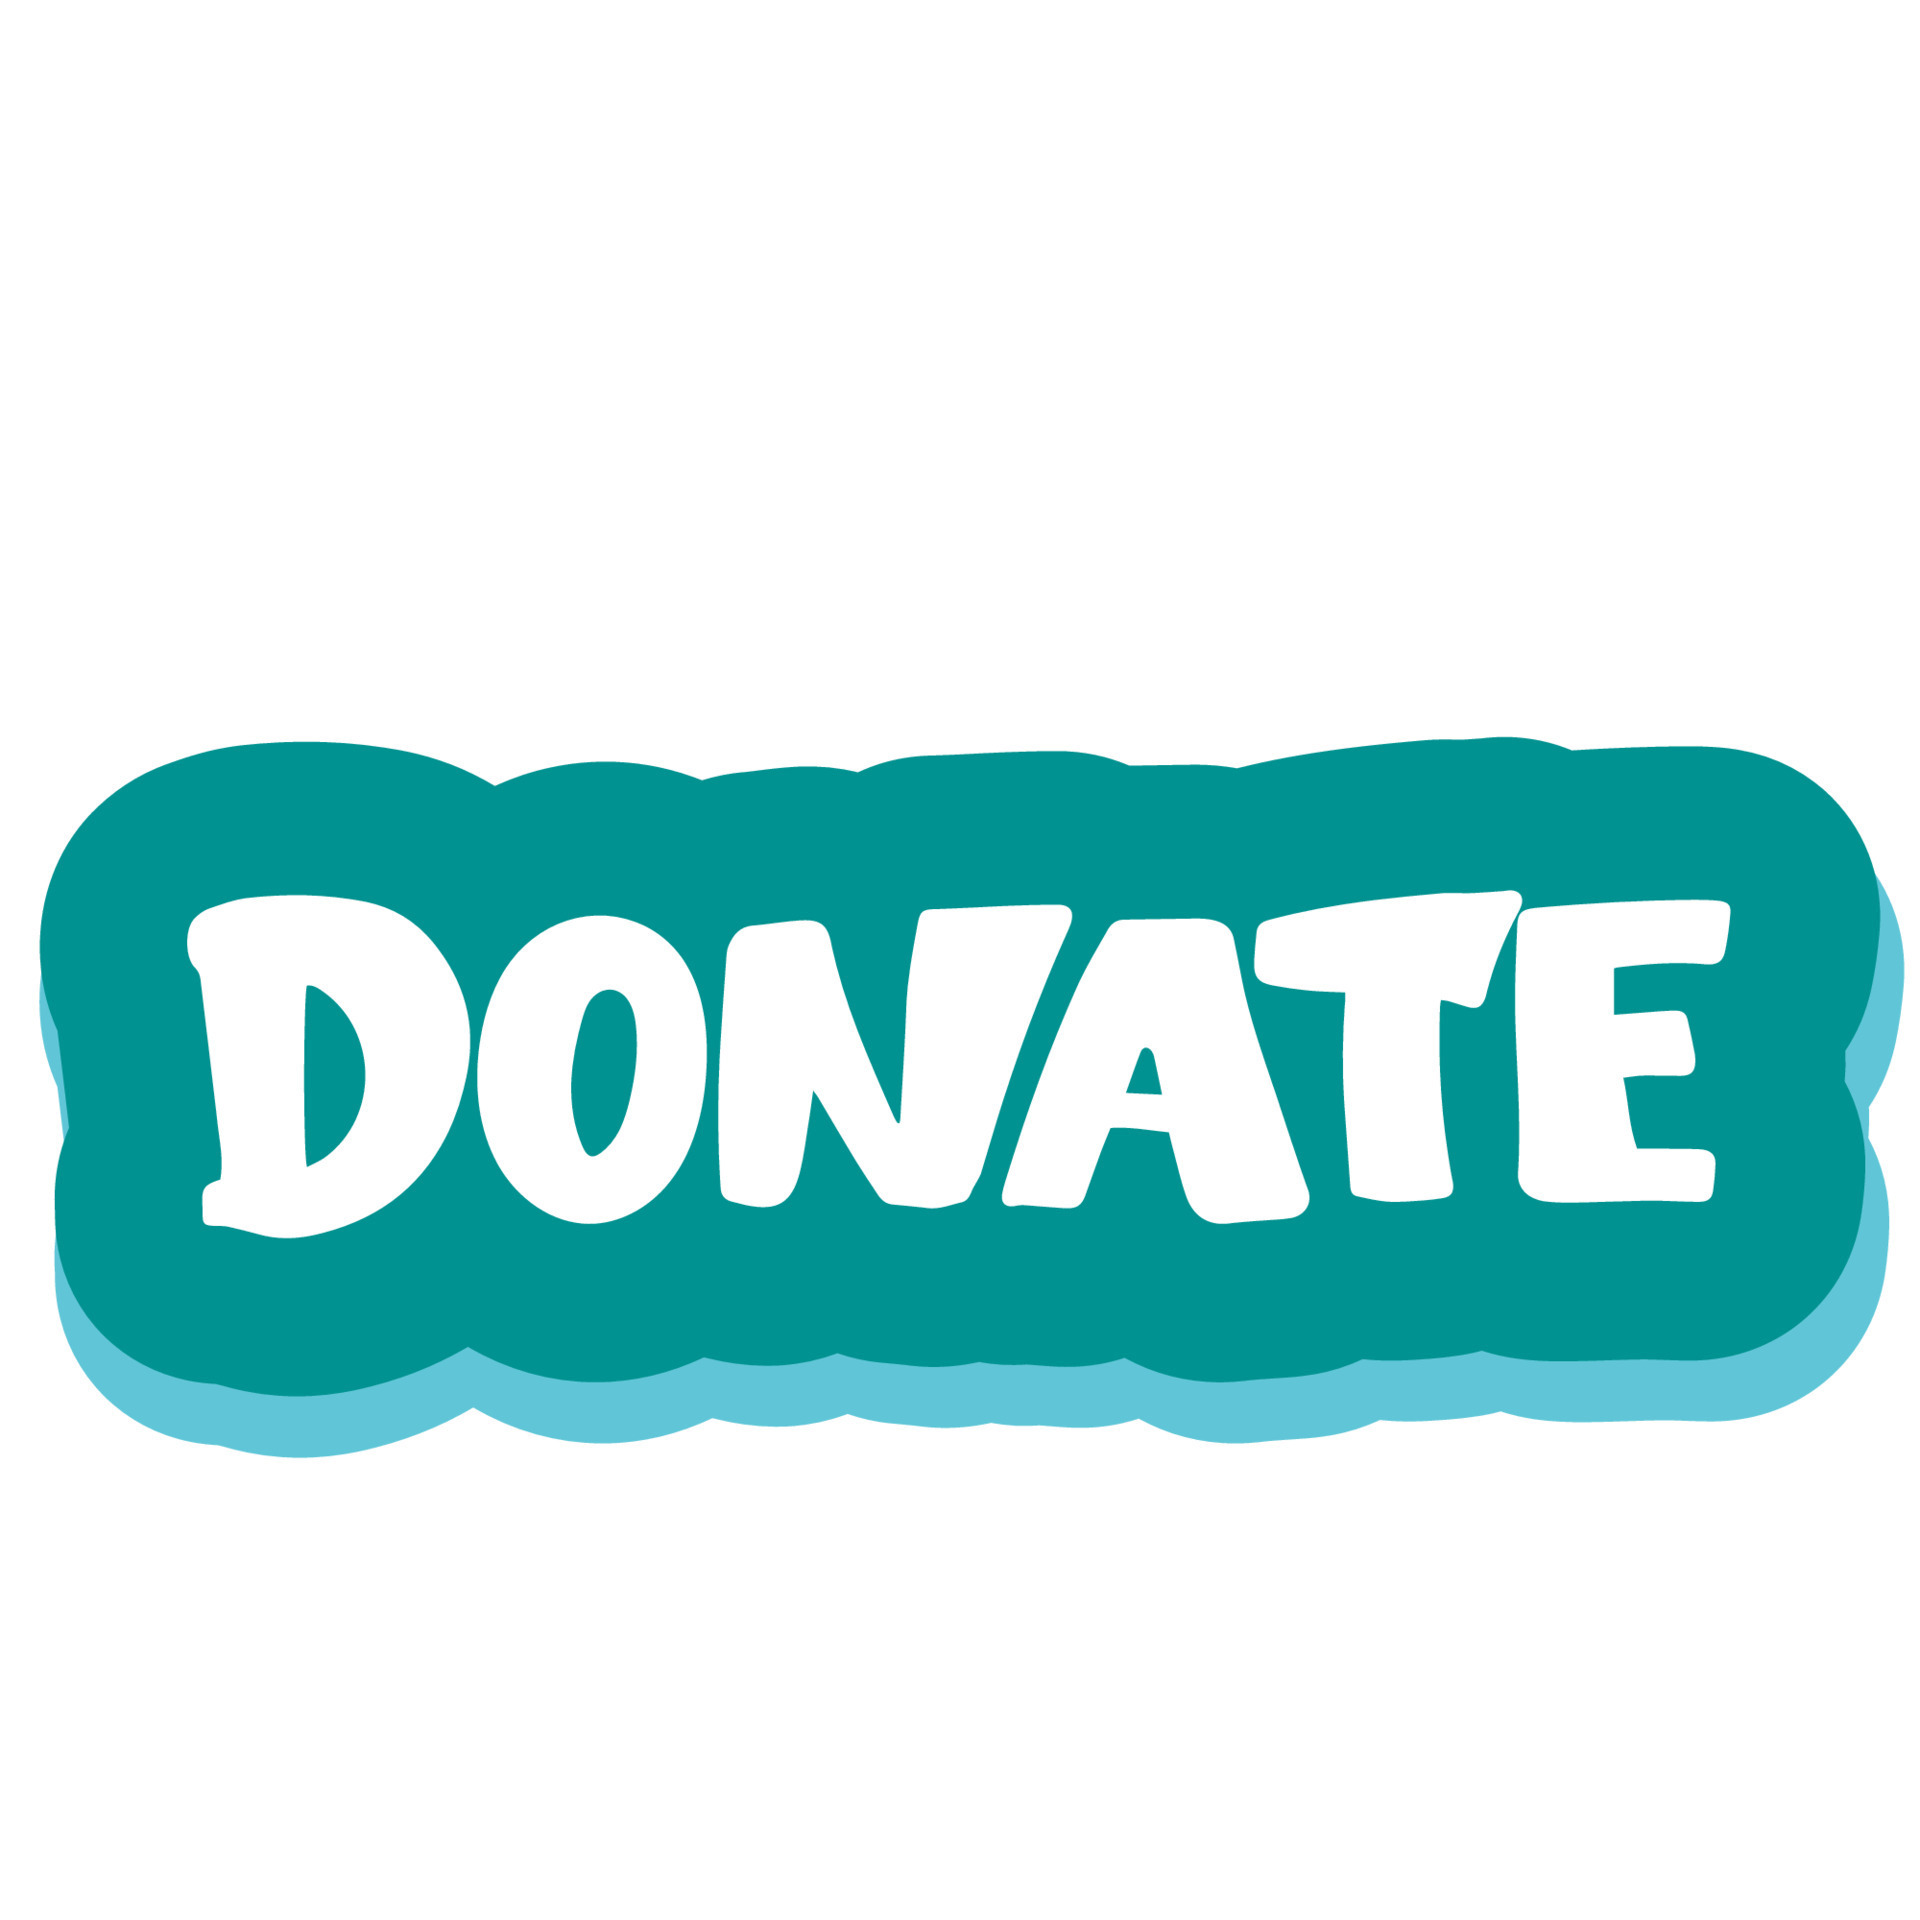 Vector Donate Concept Hand And Money Button In Flat Style